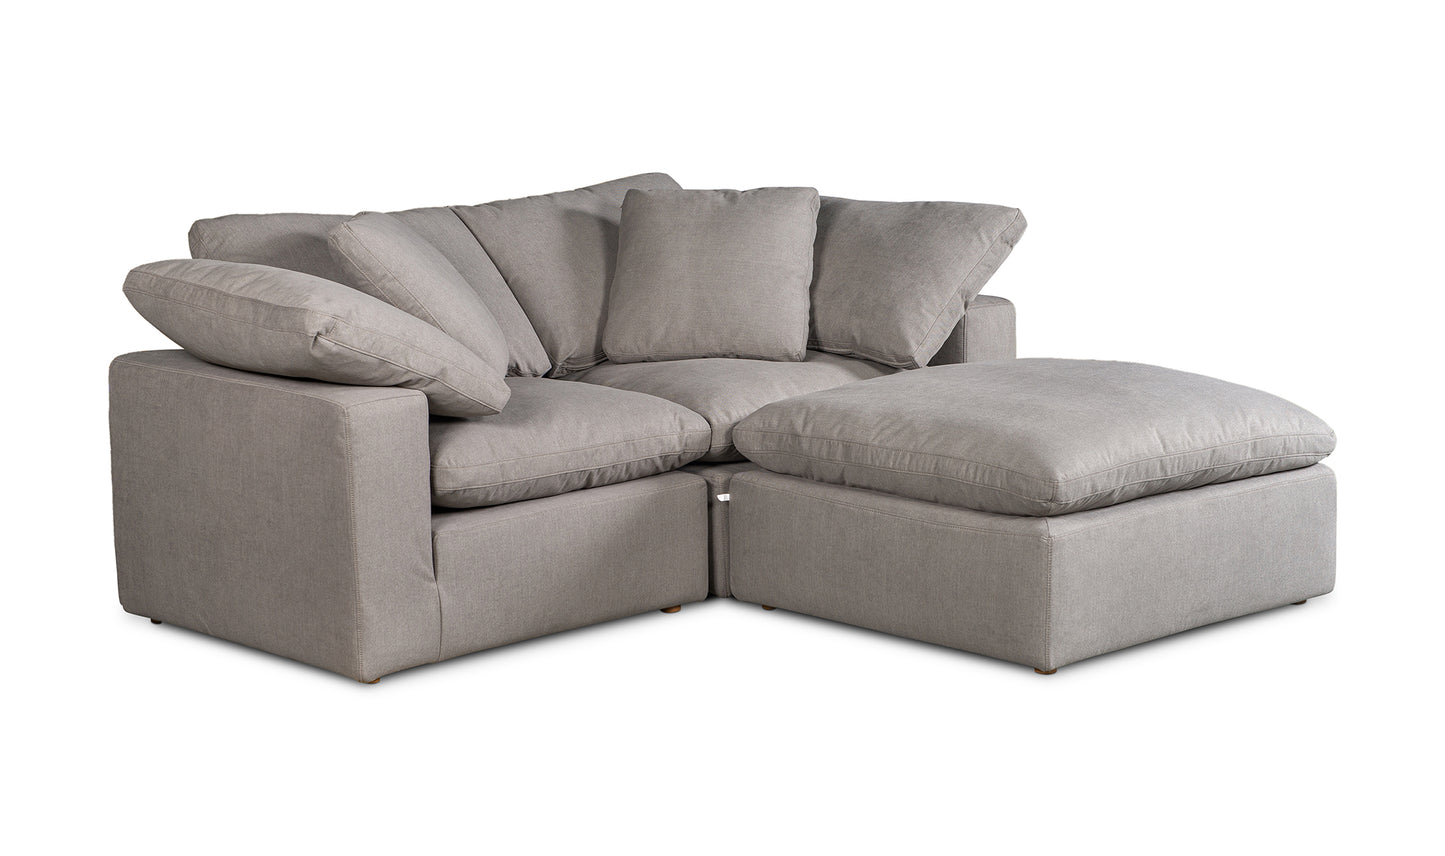 CLAY NOOK MODULAR SECTIONAL PERFORMANCE FABRIC.